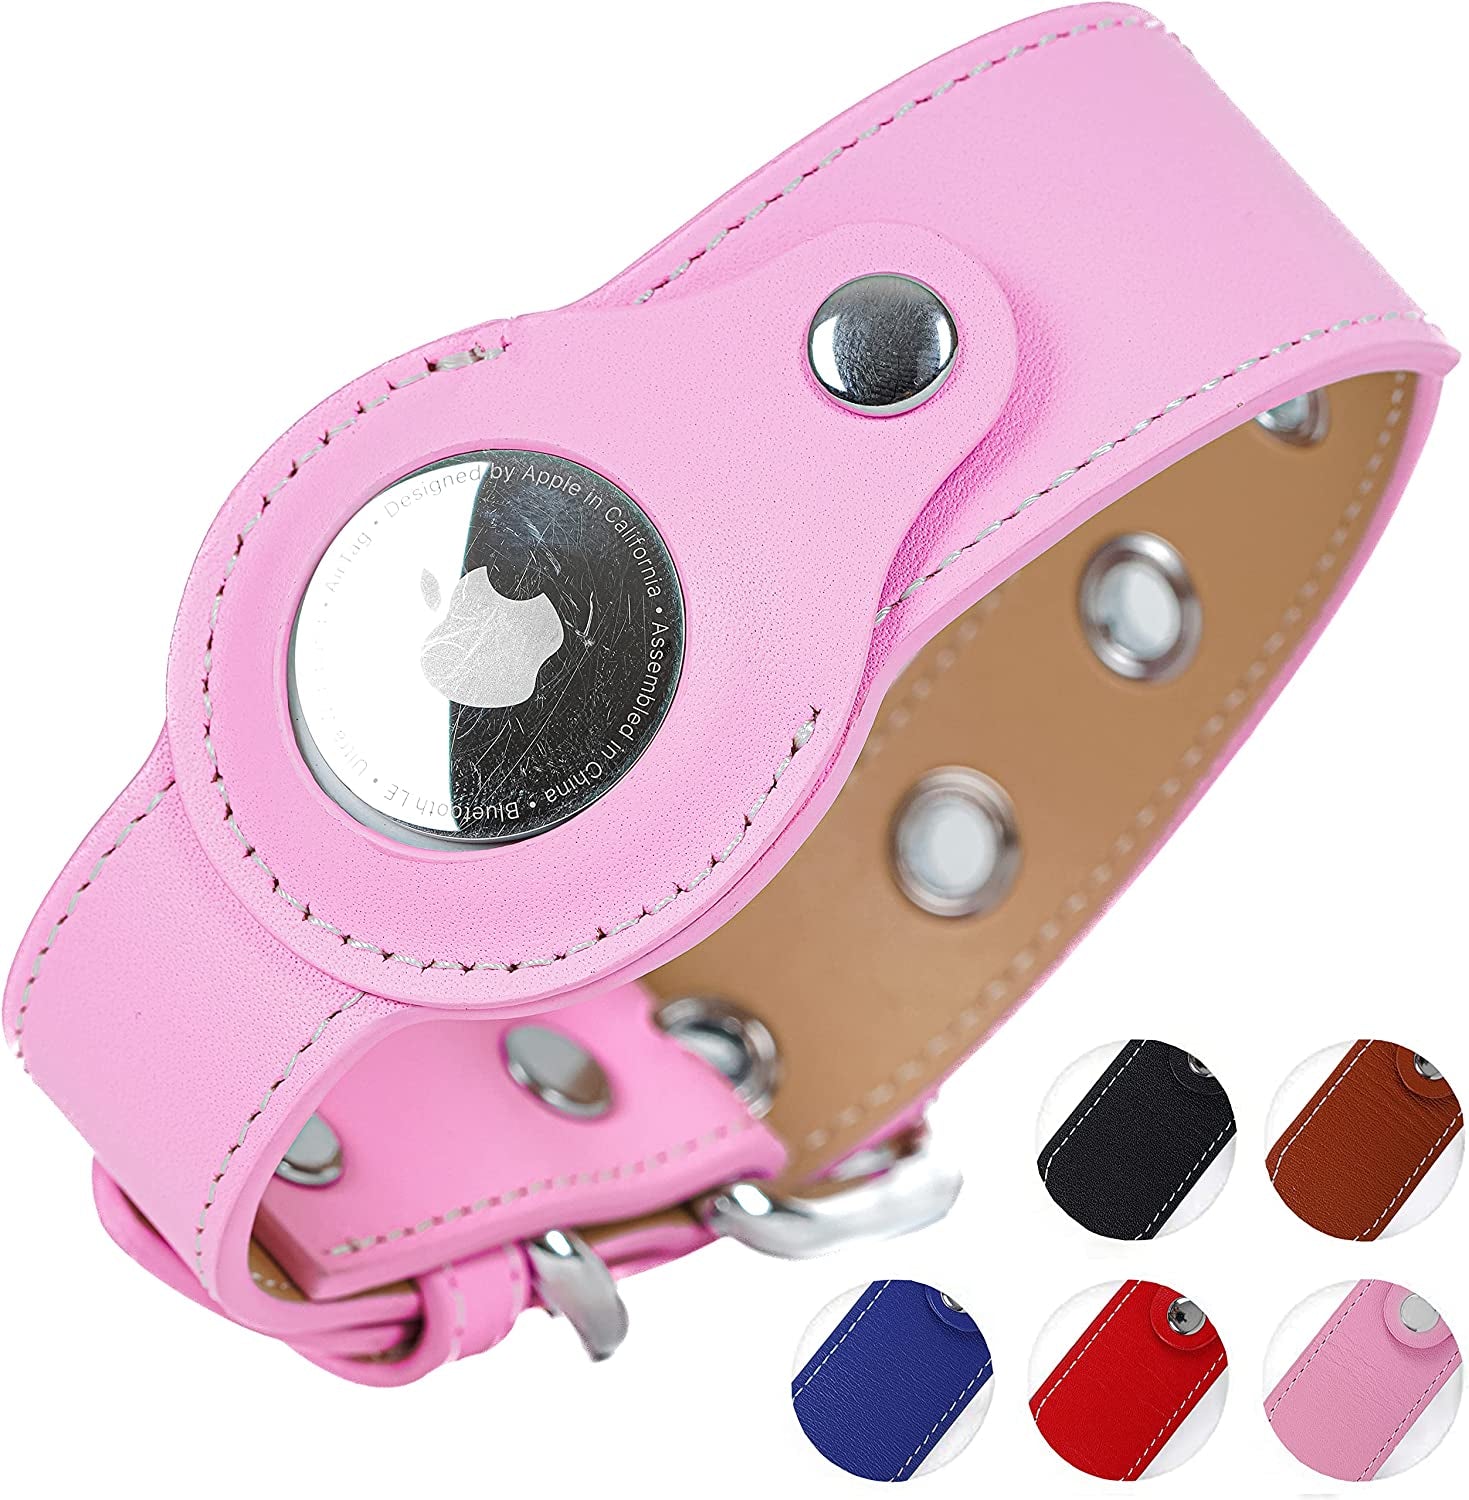 Safe Paws Genuine Leather Airtag Cat Collar for Cats & Small Dogs - Our Airtag Collars Use Leather Because It'S Durable Pliable & Soft - Various Sizes & Colors Ensure You Find the Ideal Air Tag Collar